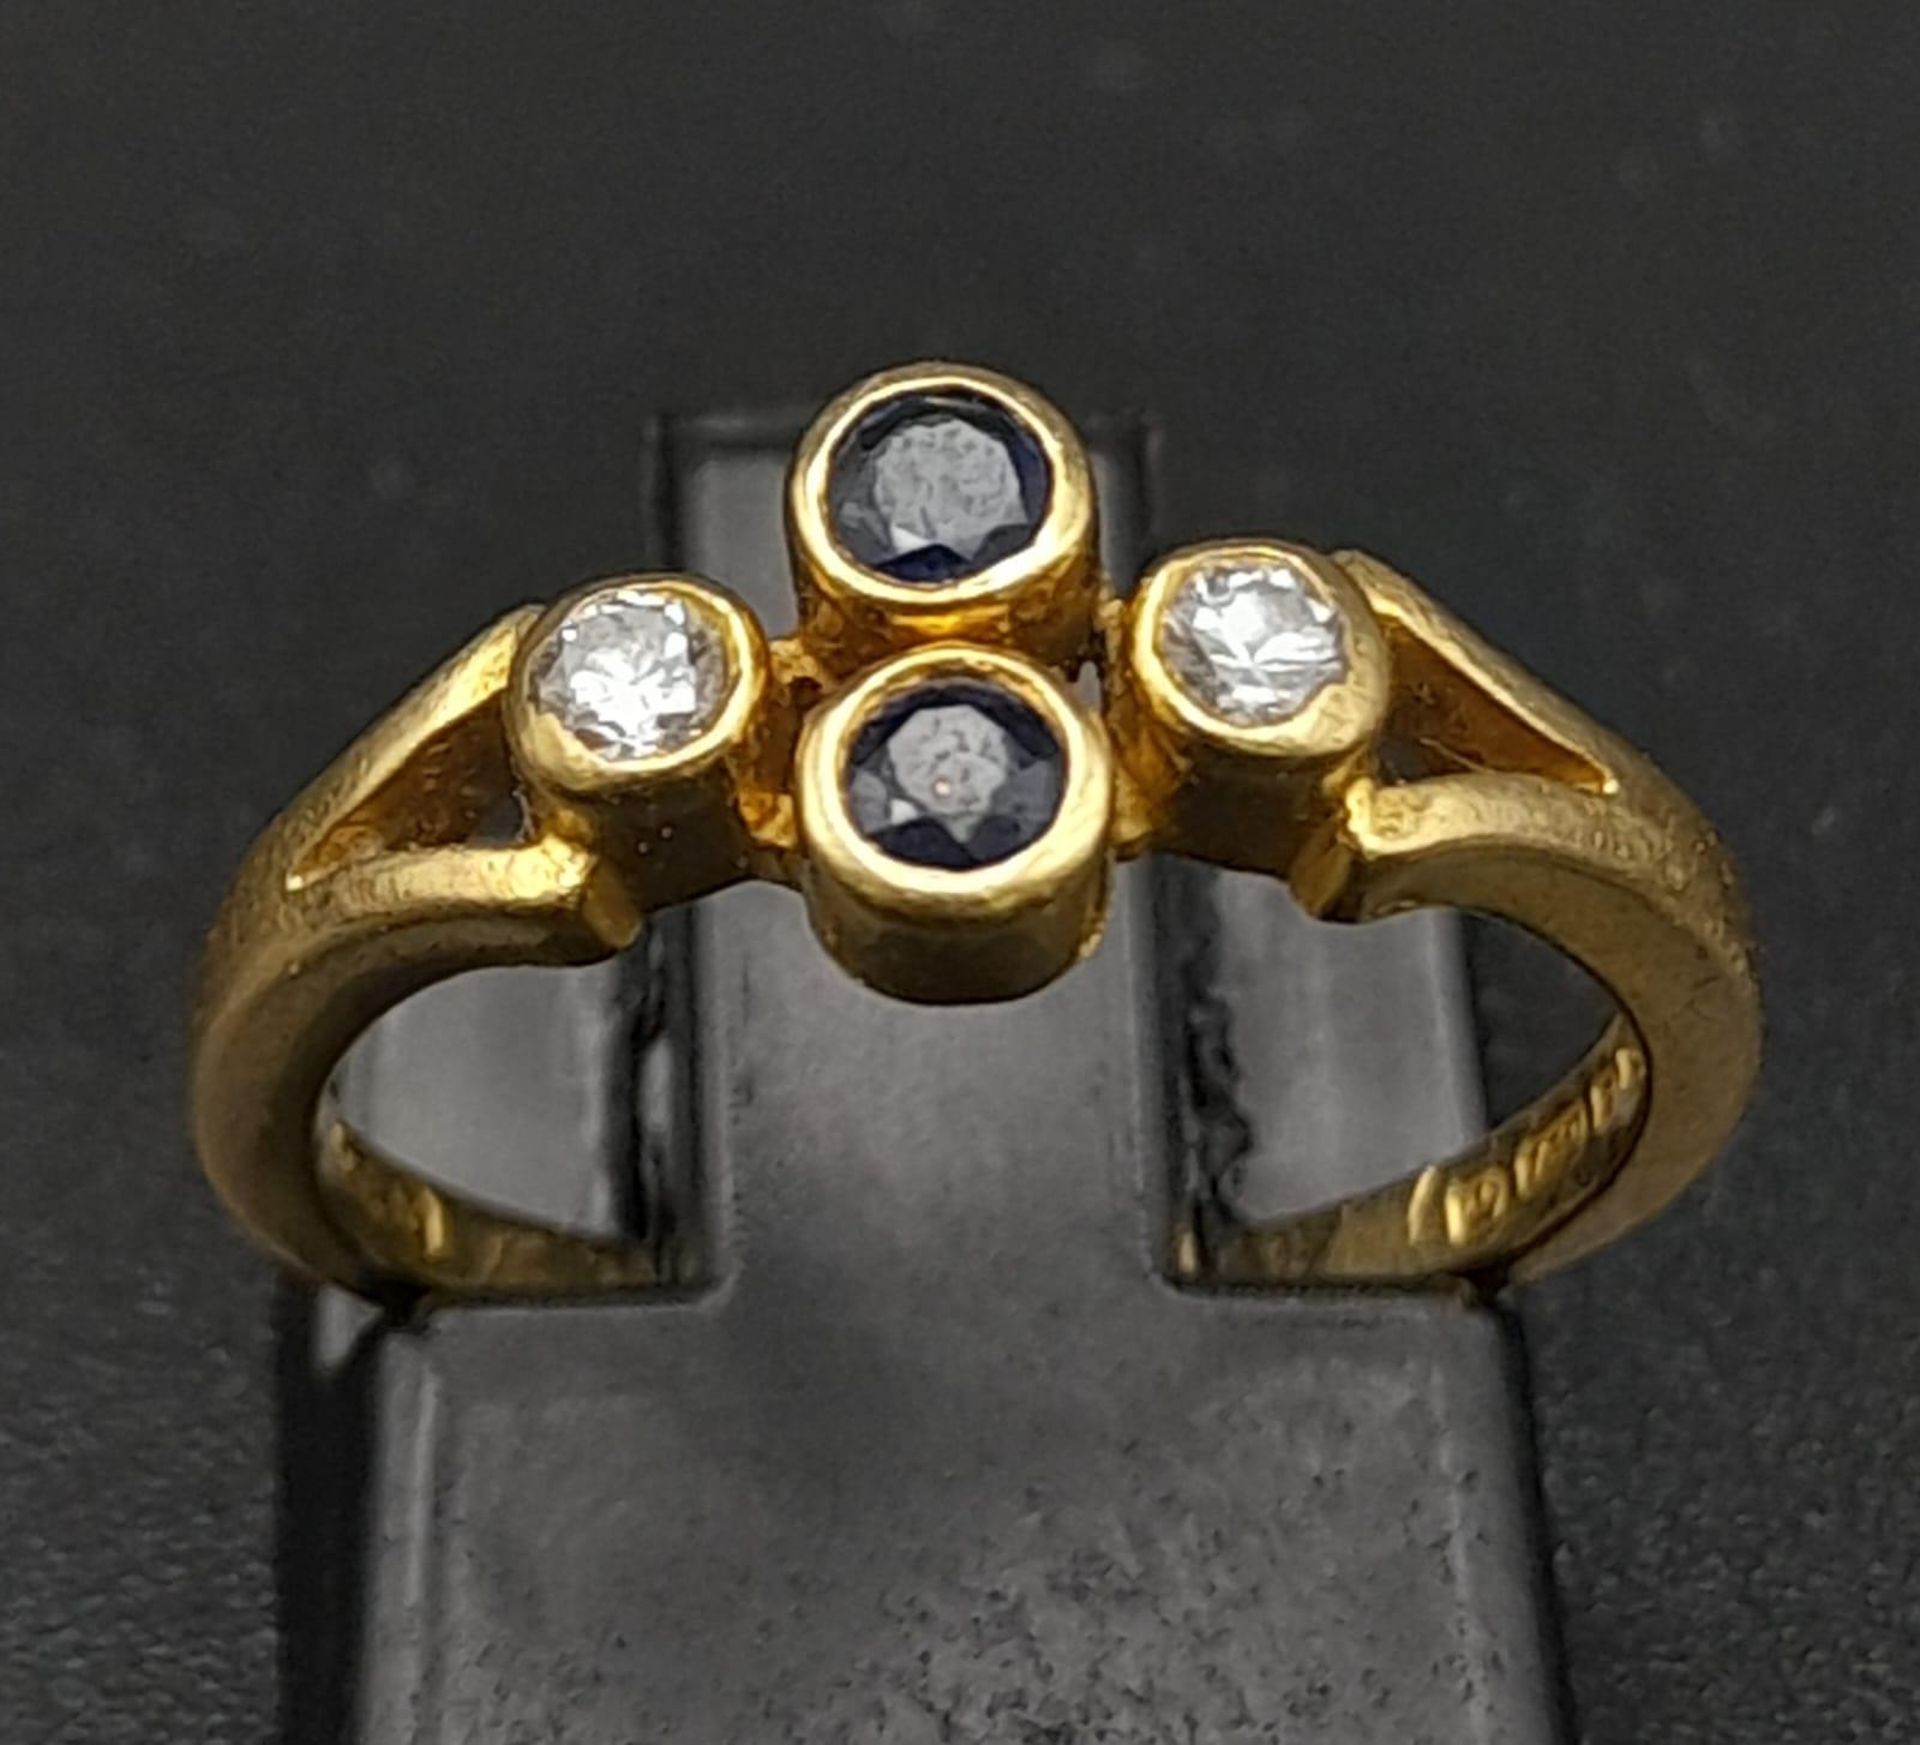 A Vintage 18K Yellow Gold Diamond and Sapphire Ring. Two vertical sapphires and two horizontal